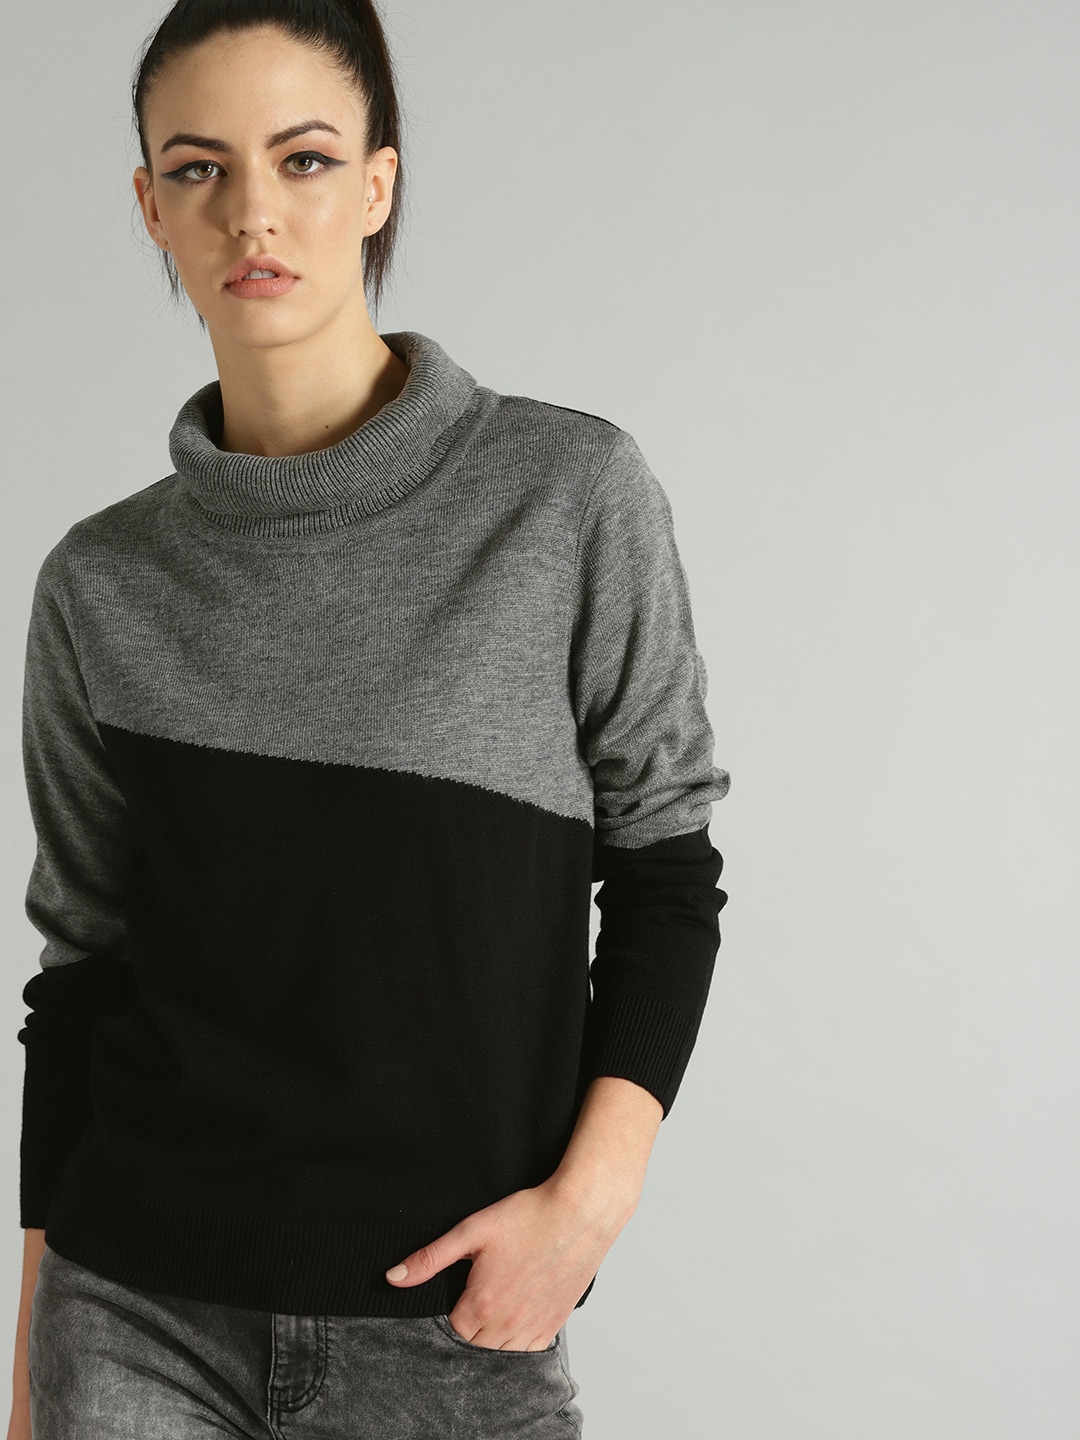 The Roadster Lifestyle Co Women Grey & Black Colourblocked Sweater Price in India